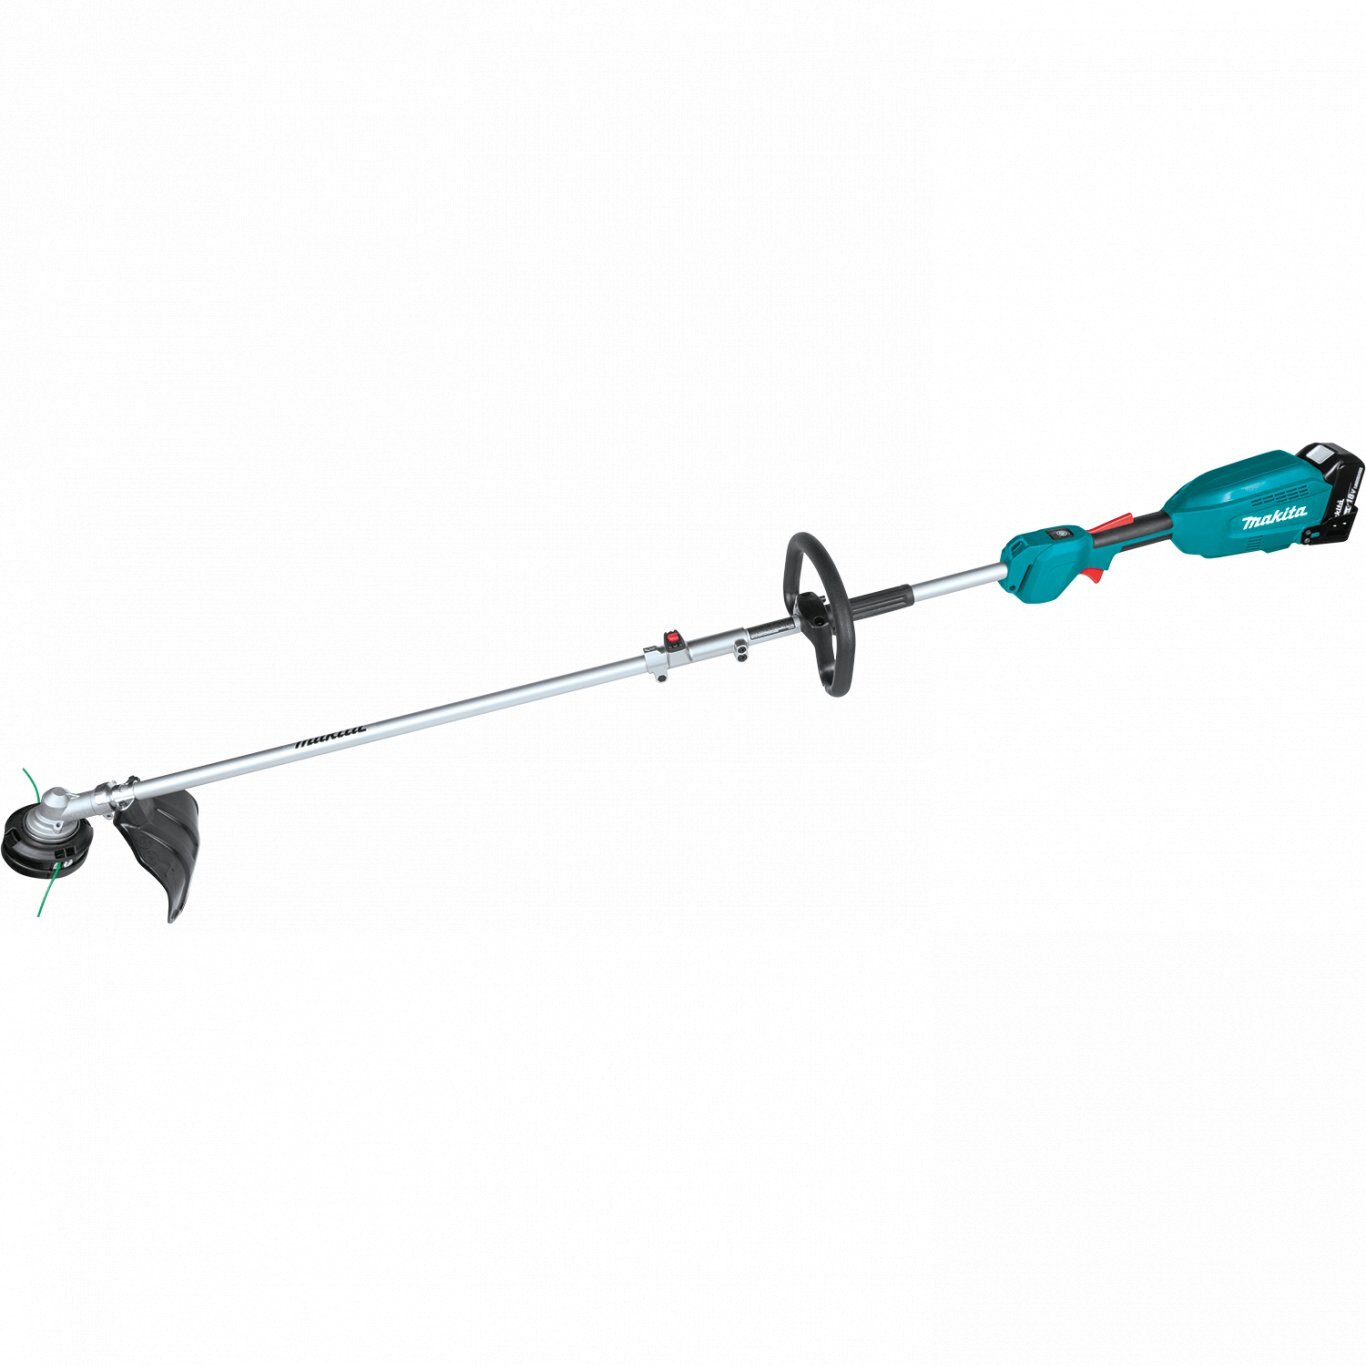 Makita 18V LXT® Lithium?Ion Brushless Cordless Couple Shaft Power Head Kit w/ 13 String Trimmer & Blower Attachments (4.0Ah)